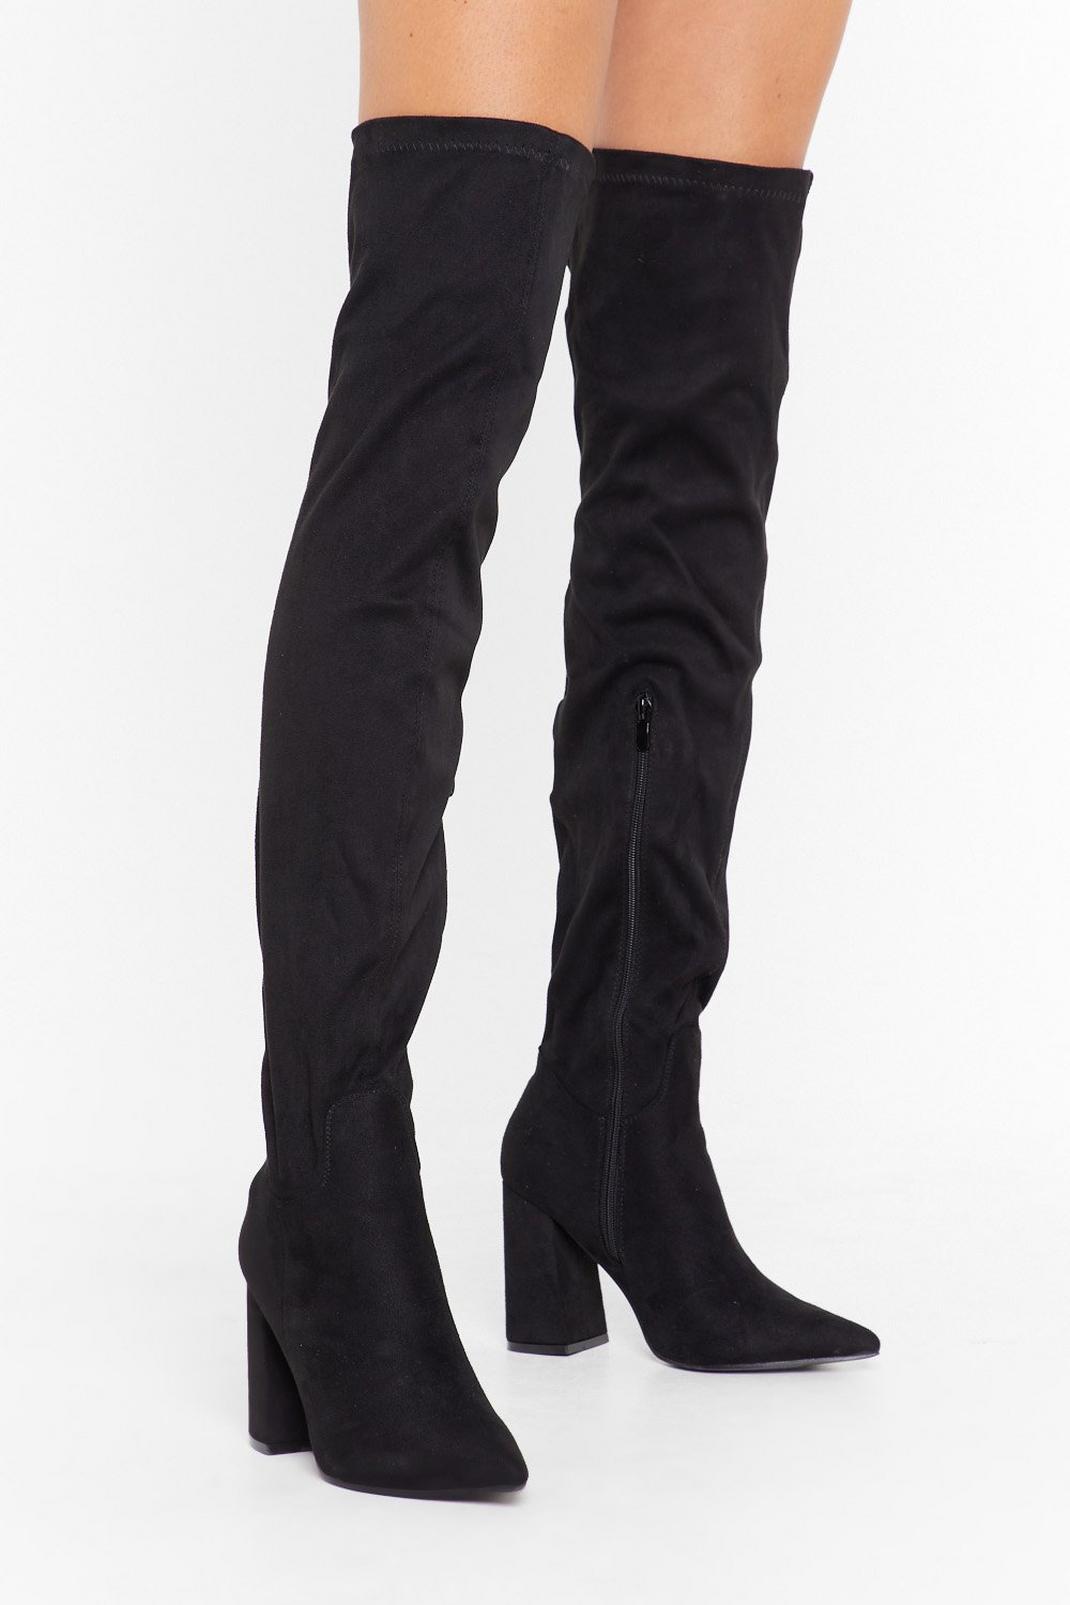 No Point Arguing Over-the-Knee Boots image number 1